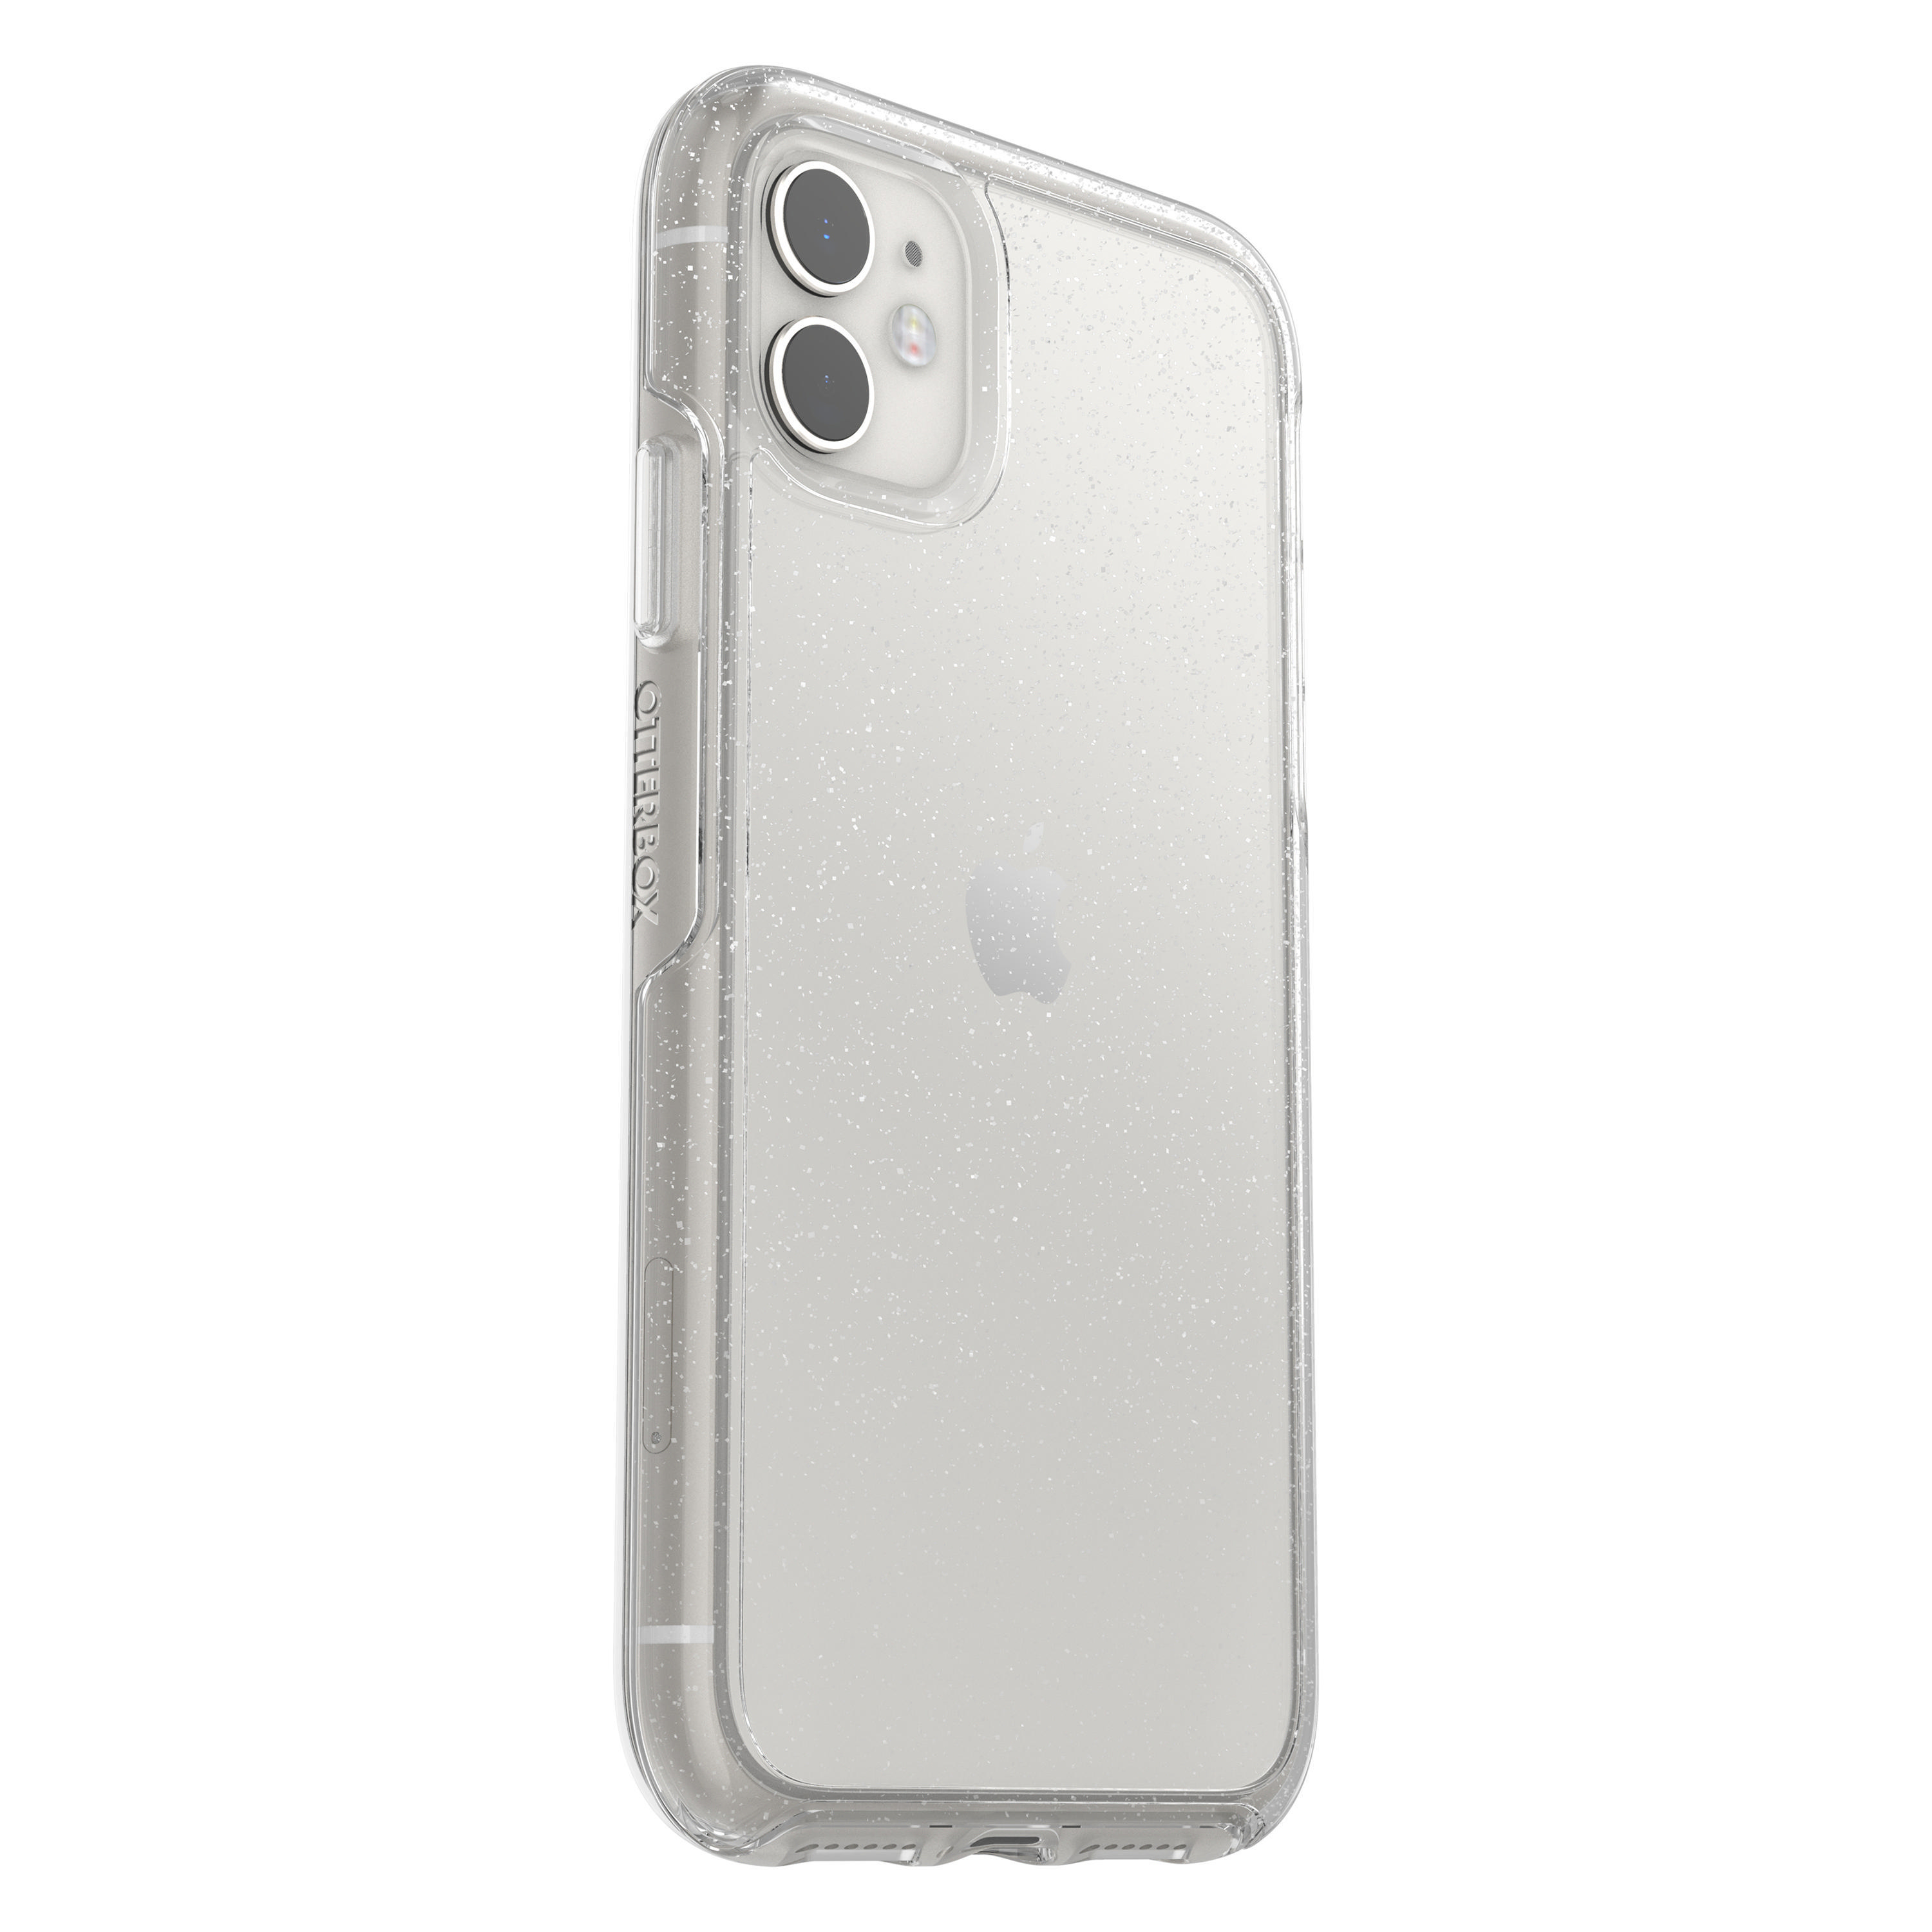 Apple, Symmetry, 11, Transparent OTTERBOX iPhone Backcover,